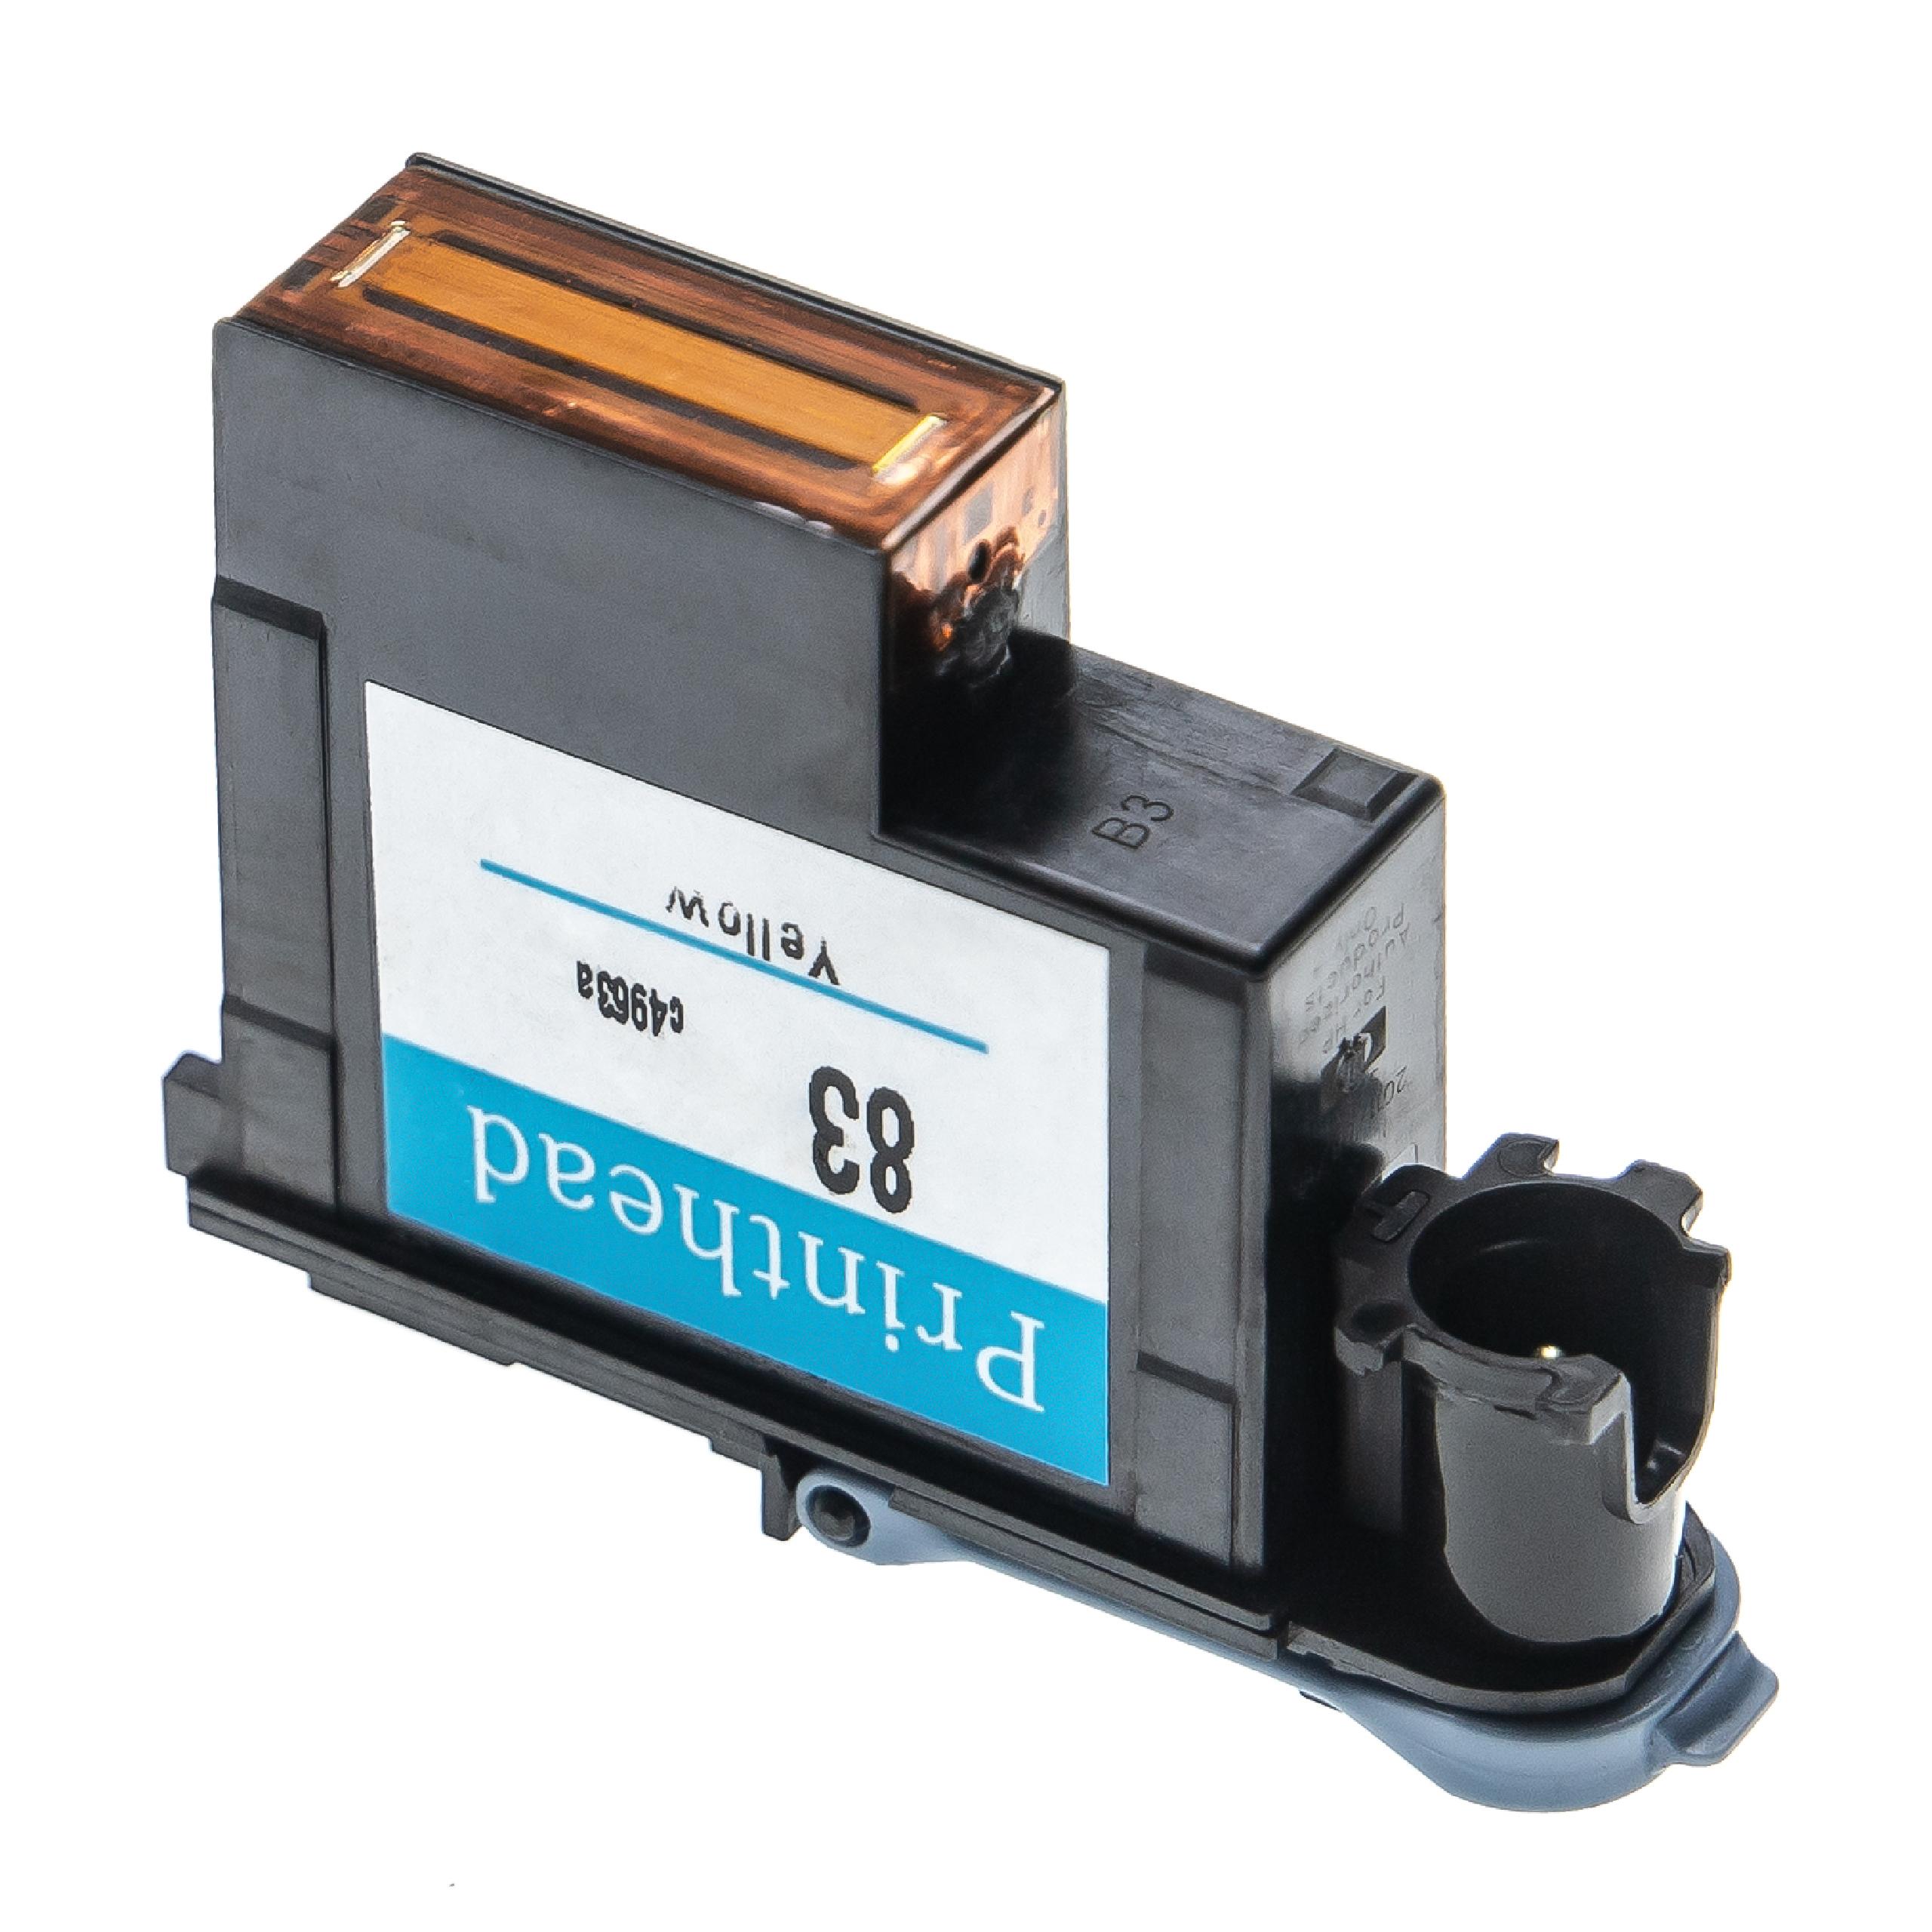 Printhead for HP DesignJet HP C4963A Printer - 13 ml, yellow, 6 cm wide, Refurbished, With Cleaner